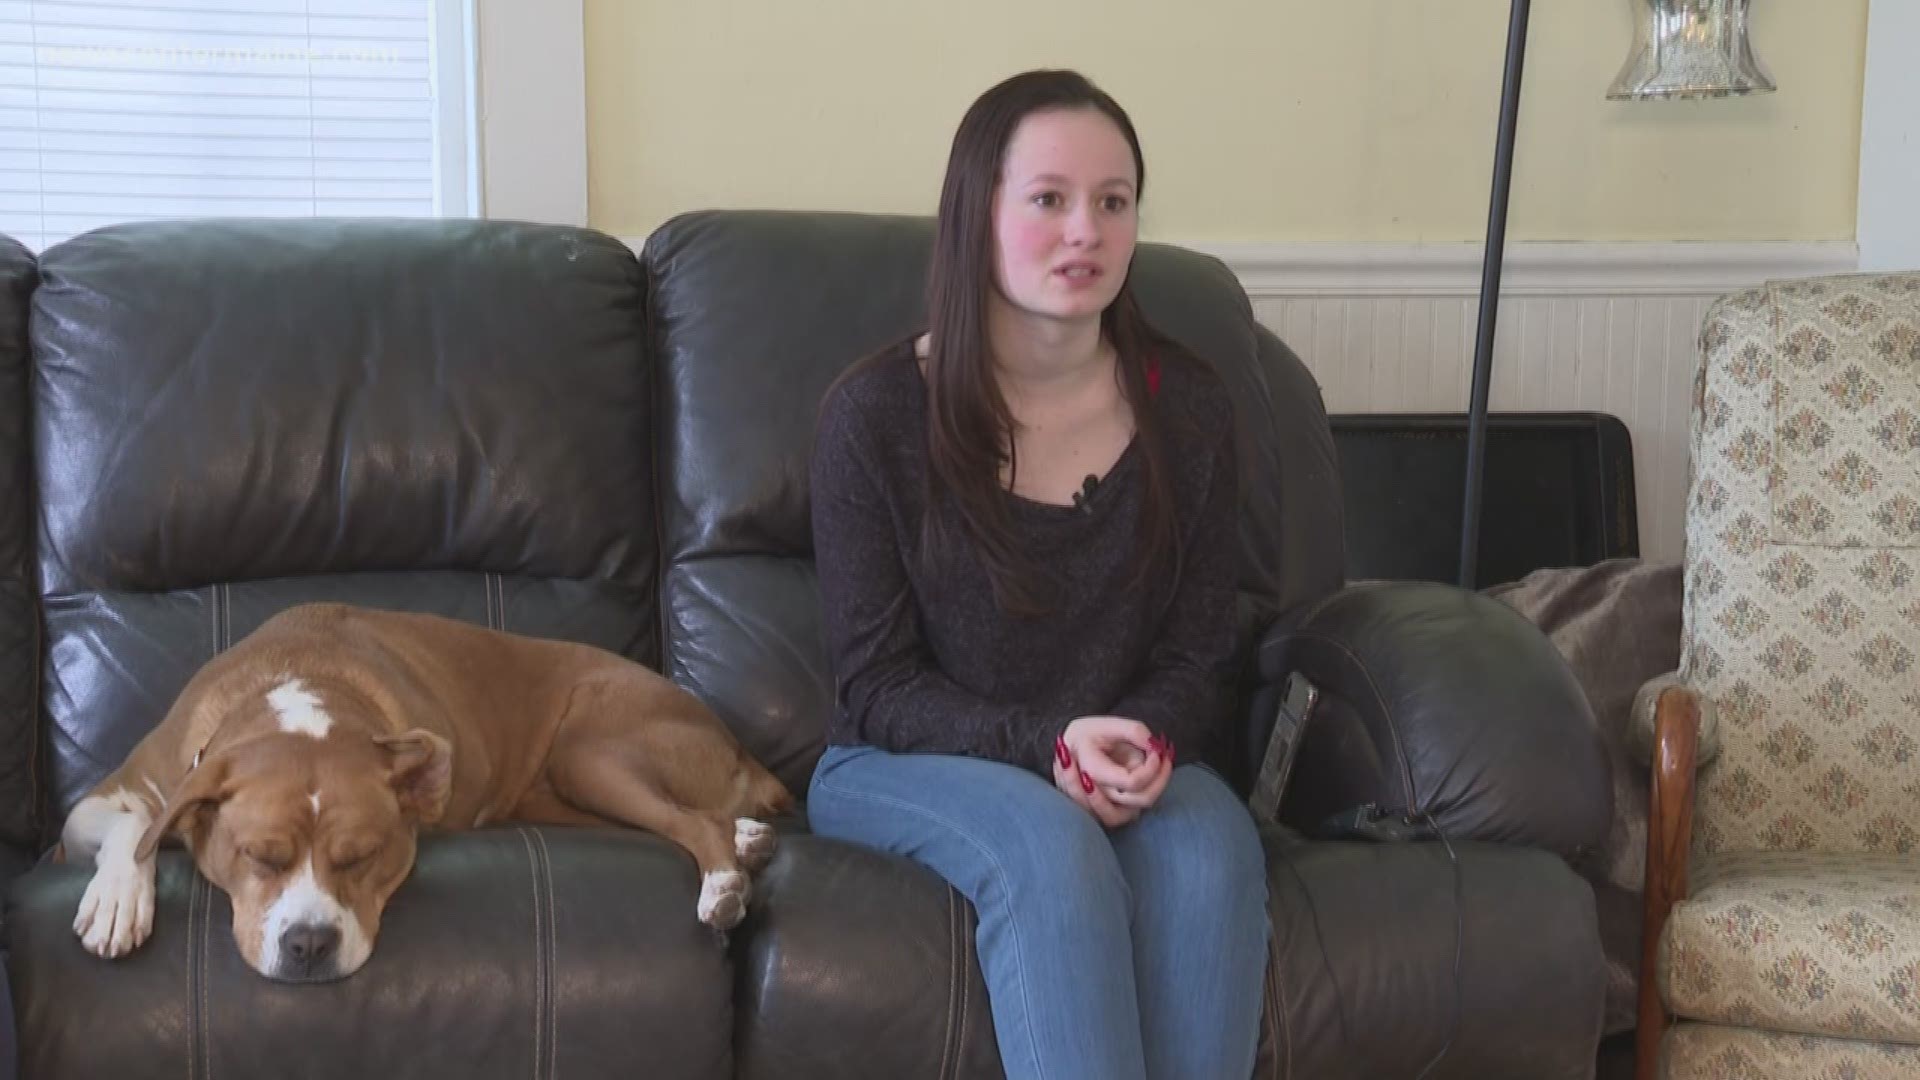 It's a rare condition that leaves some people allergic to almost everything. 15-year old Martina Baker has Mast Cell Activation Syndrome.